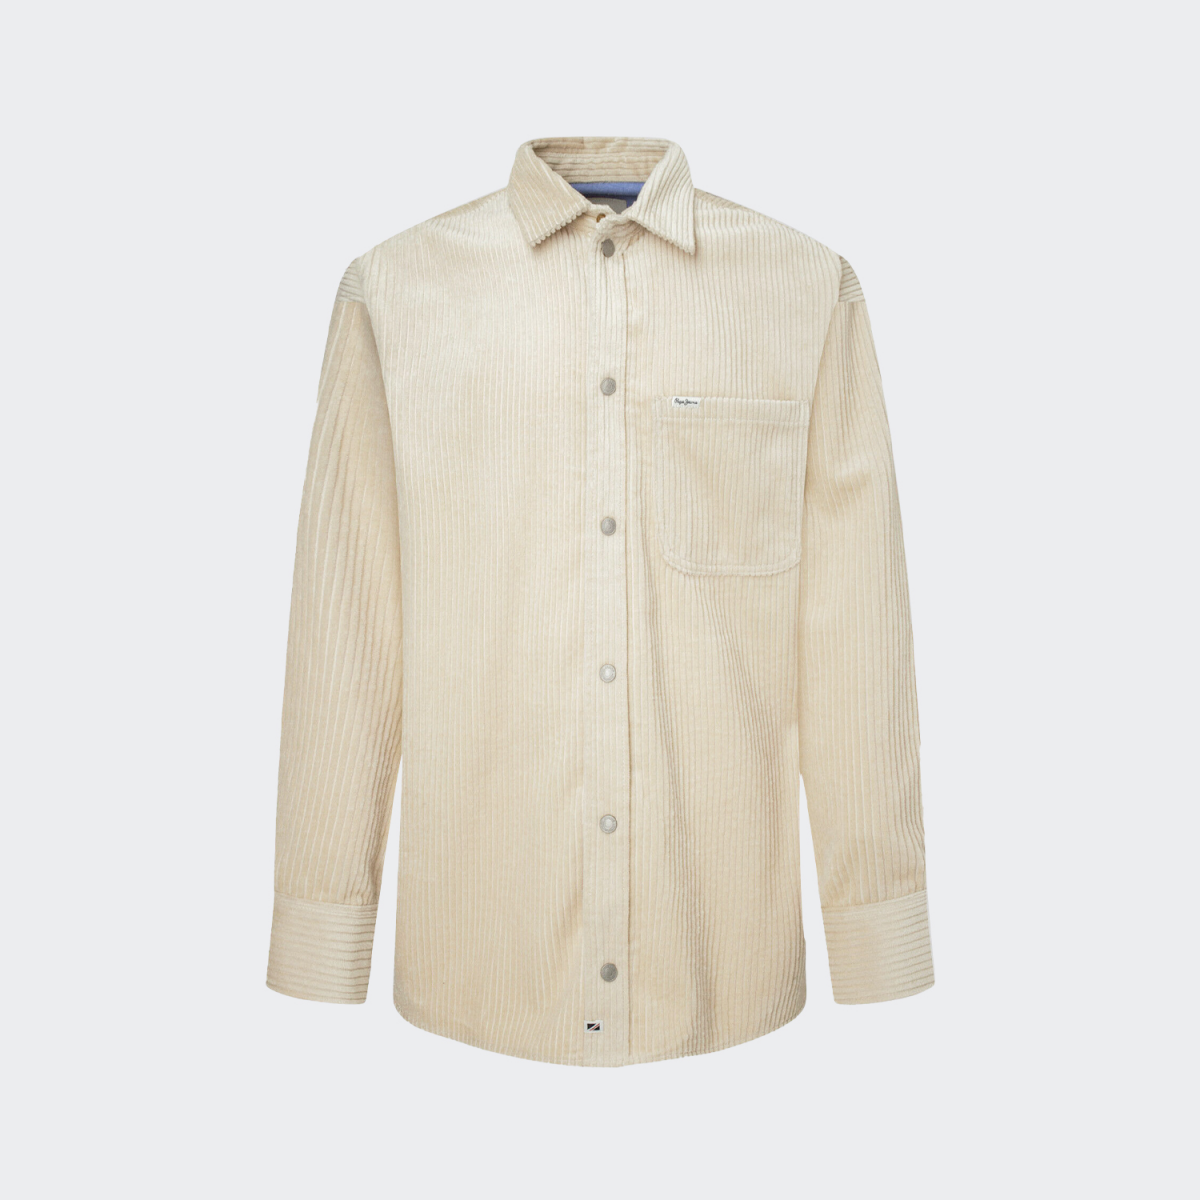 Pepe Jeans Beige Shirt - PM308175847_1 | Urban Project | T-Shirts